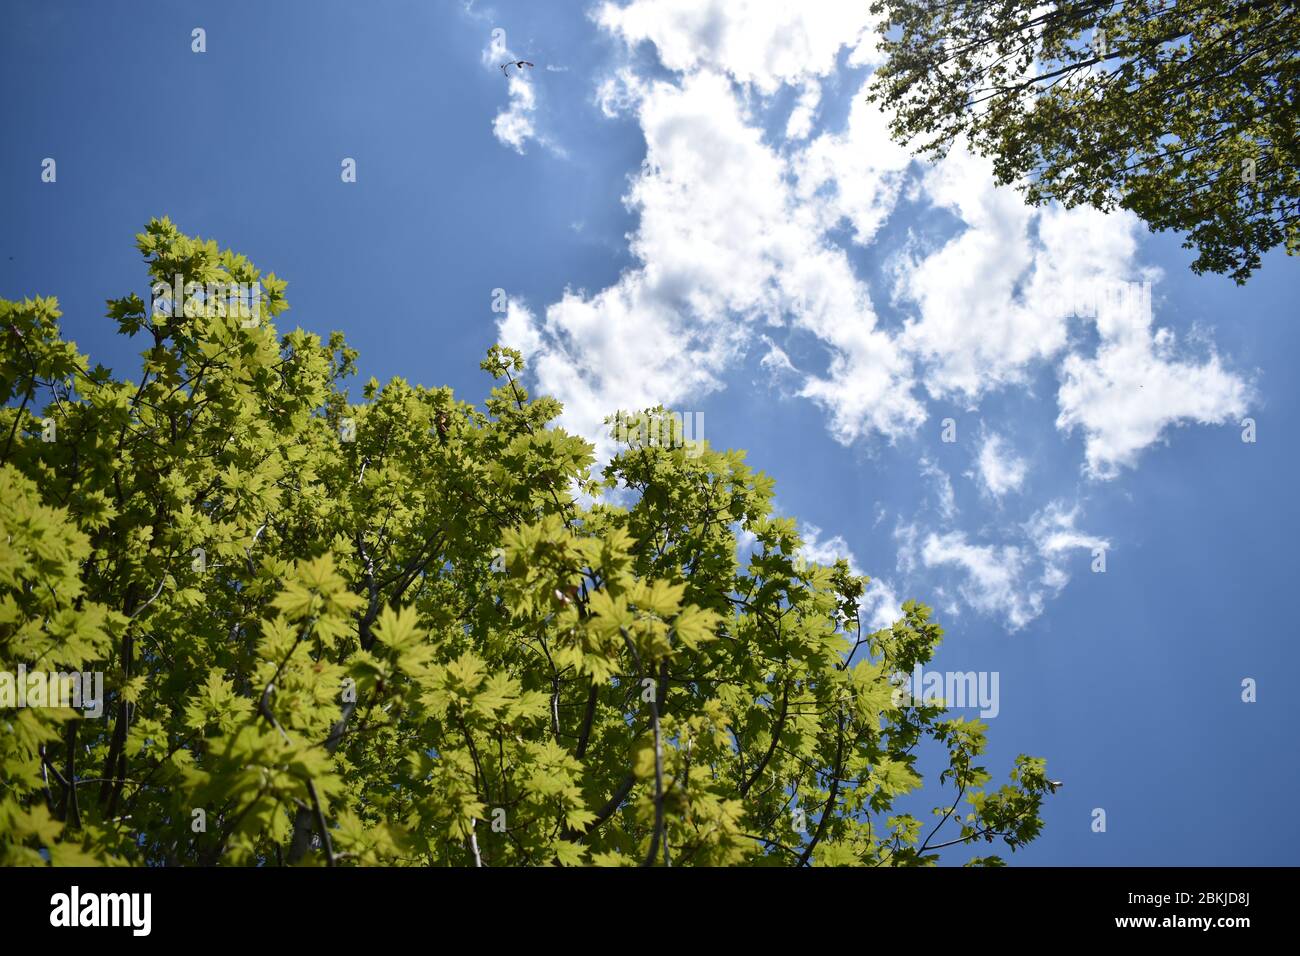 Bright sunlight shining on trees through the clouds. Stock Photo